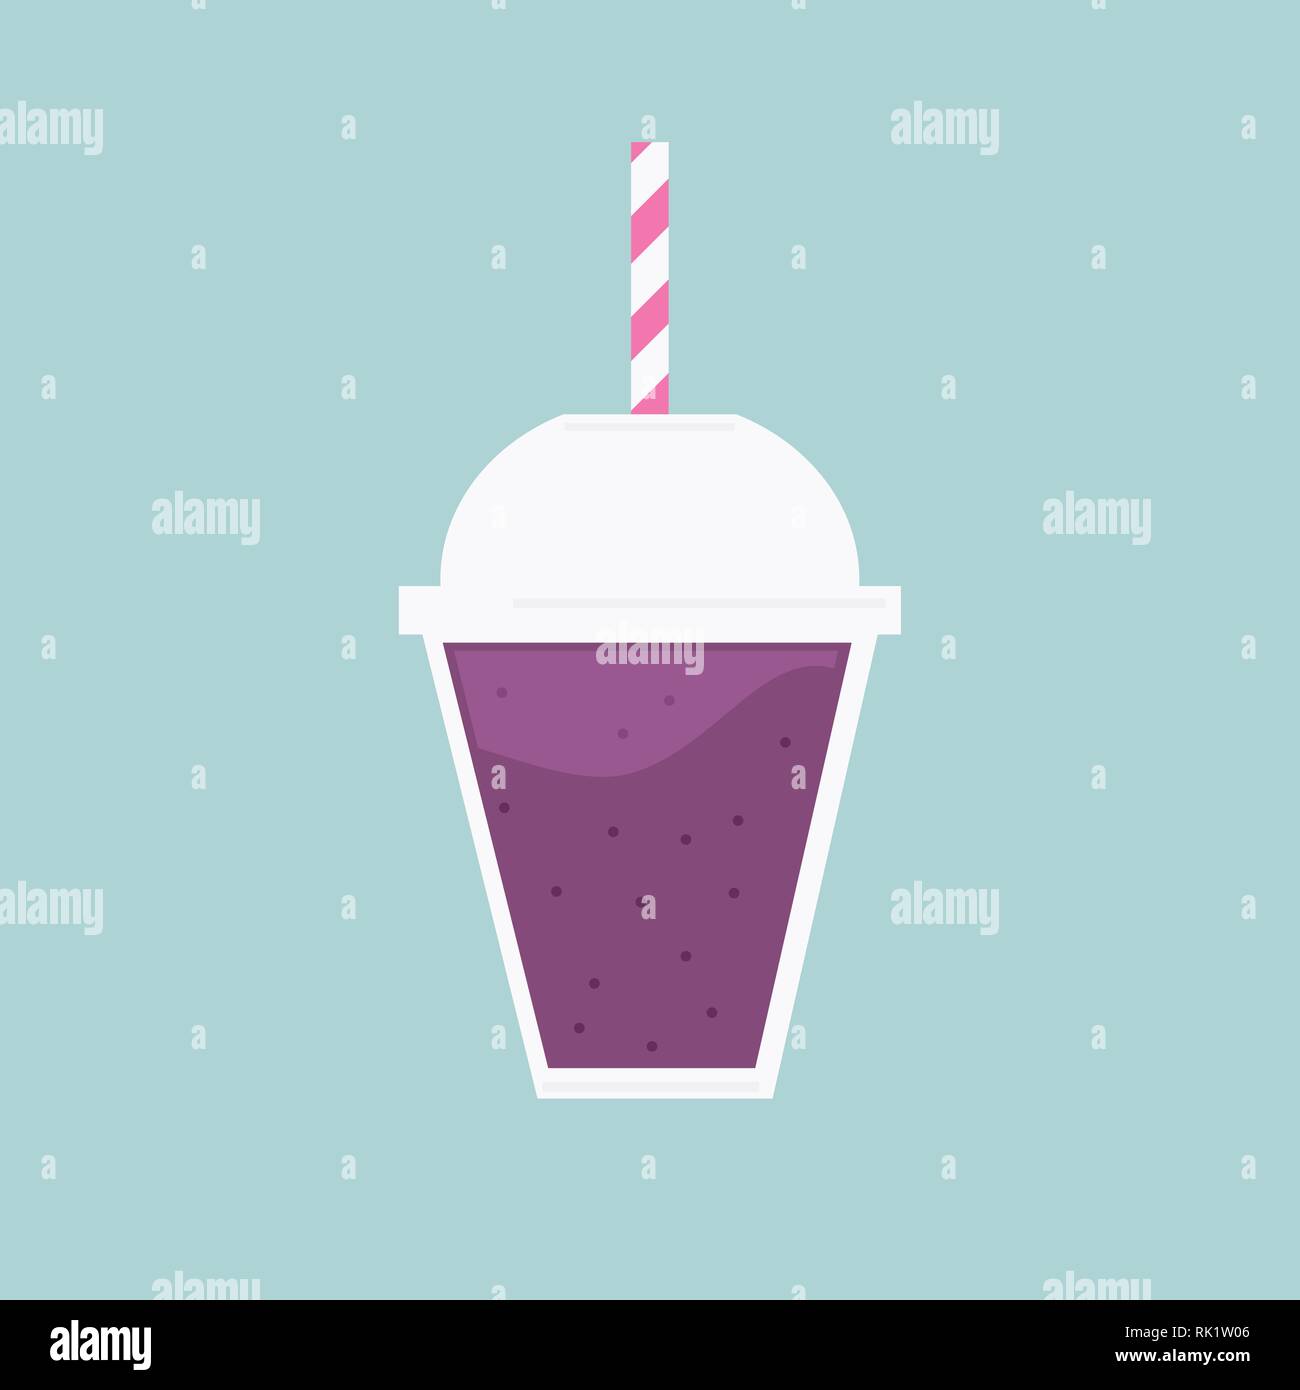 https://c8.alamy.com/comp/RK1W06/vector-illustration-smoothie-to-go-or-take-away-healthy-juice-fresh-diet-organic-fruit-shake-smoothie-cartoon-smoothie-cup-with-fruits-smoothie-coc-RK1W06.jpg